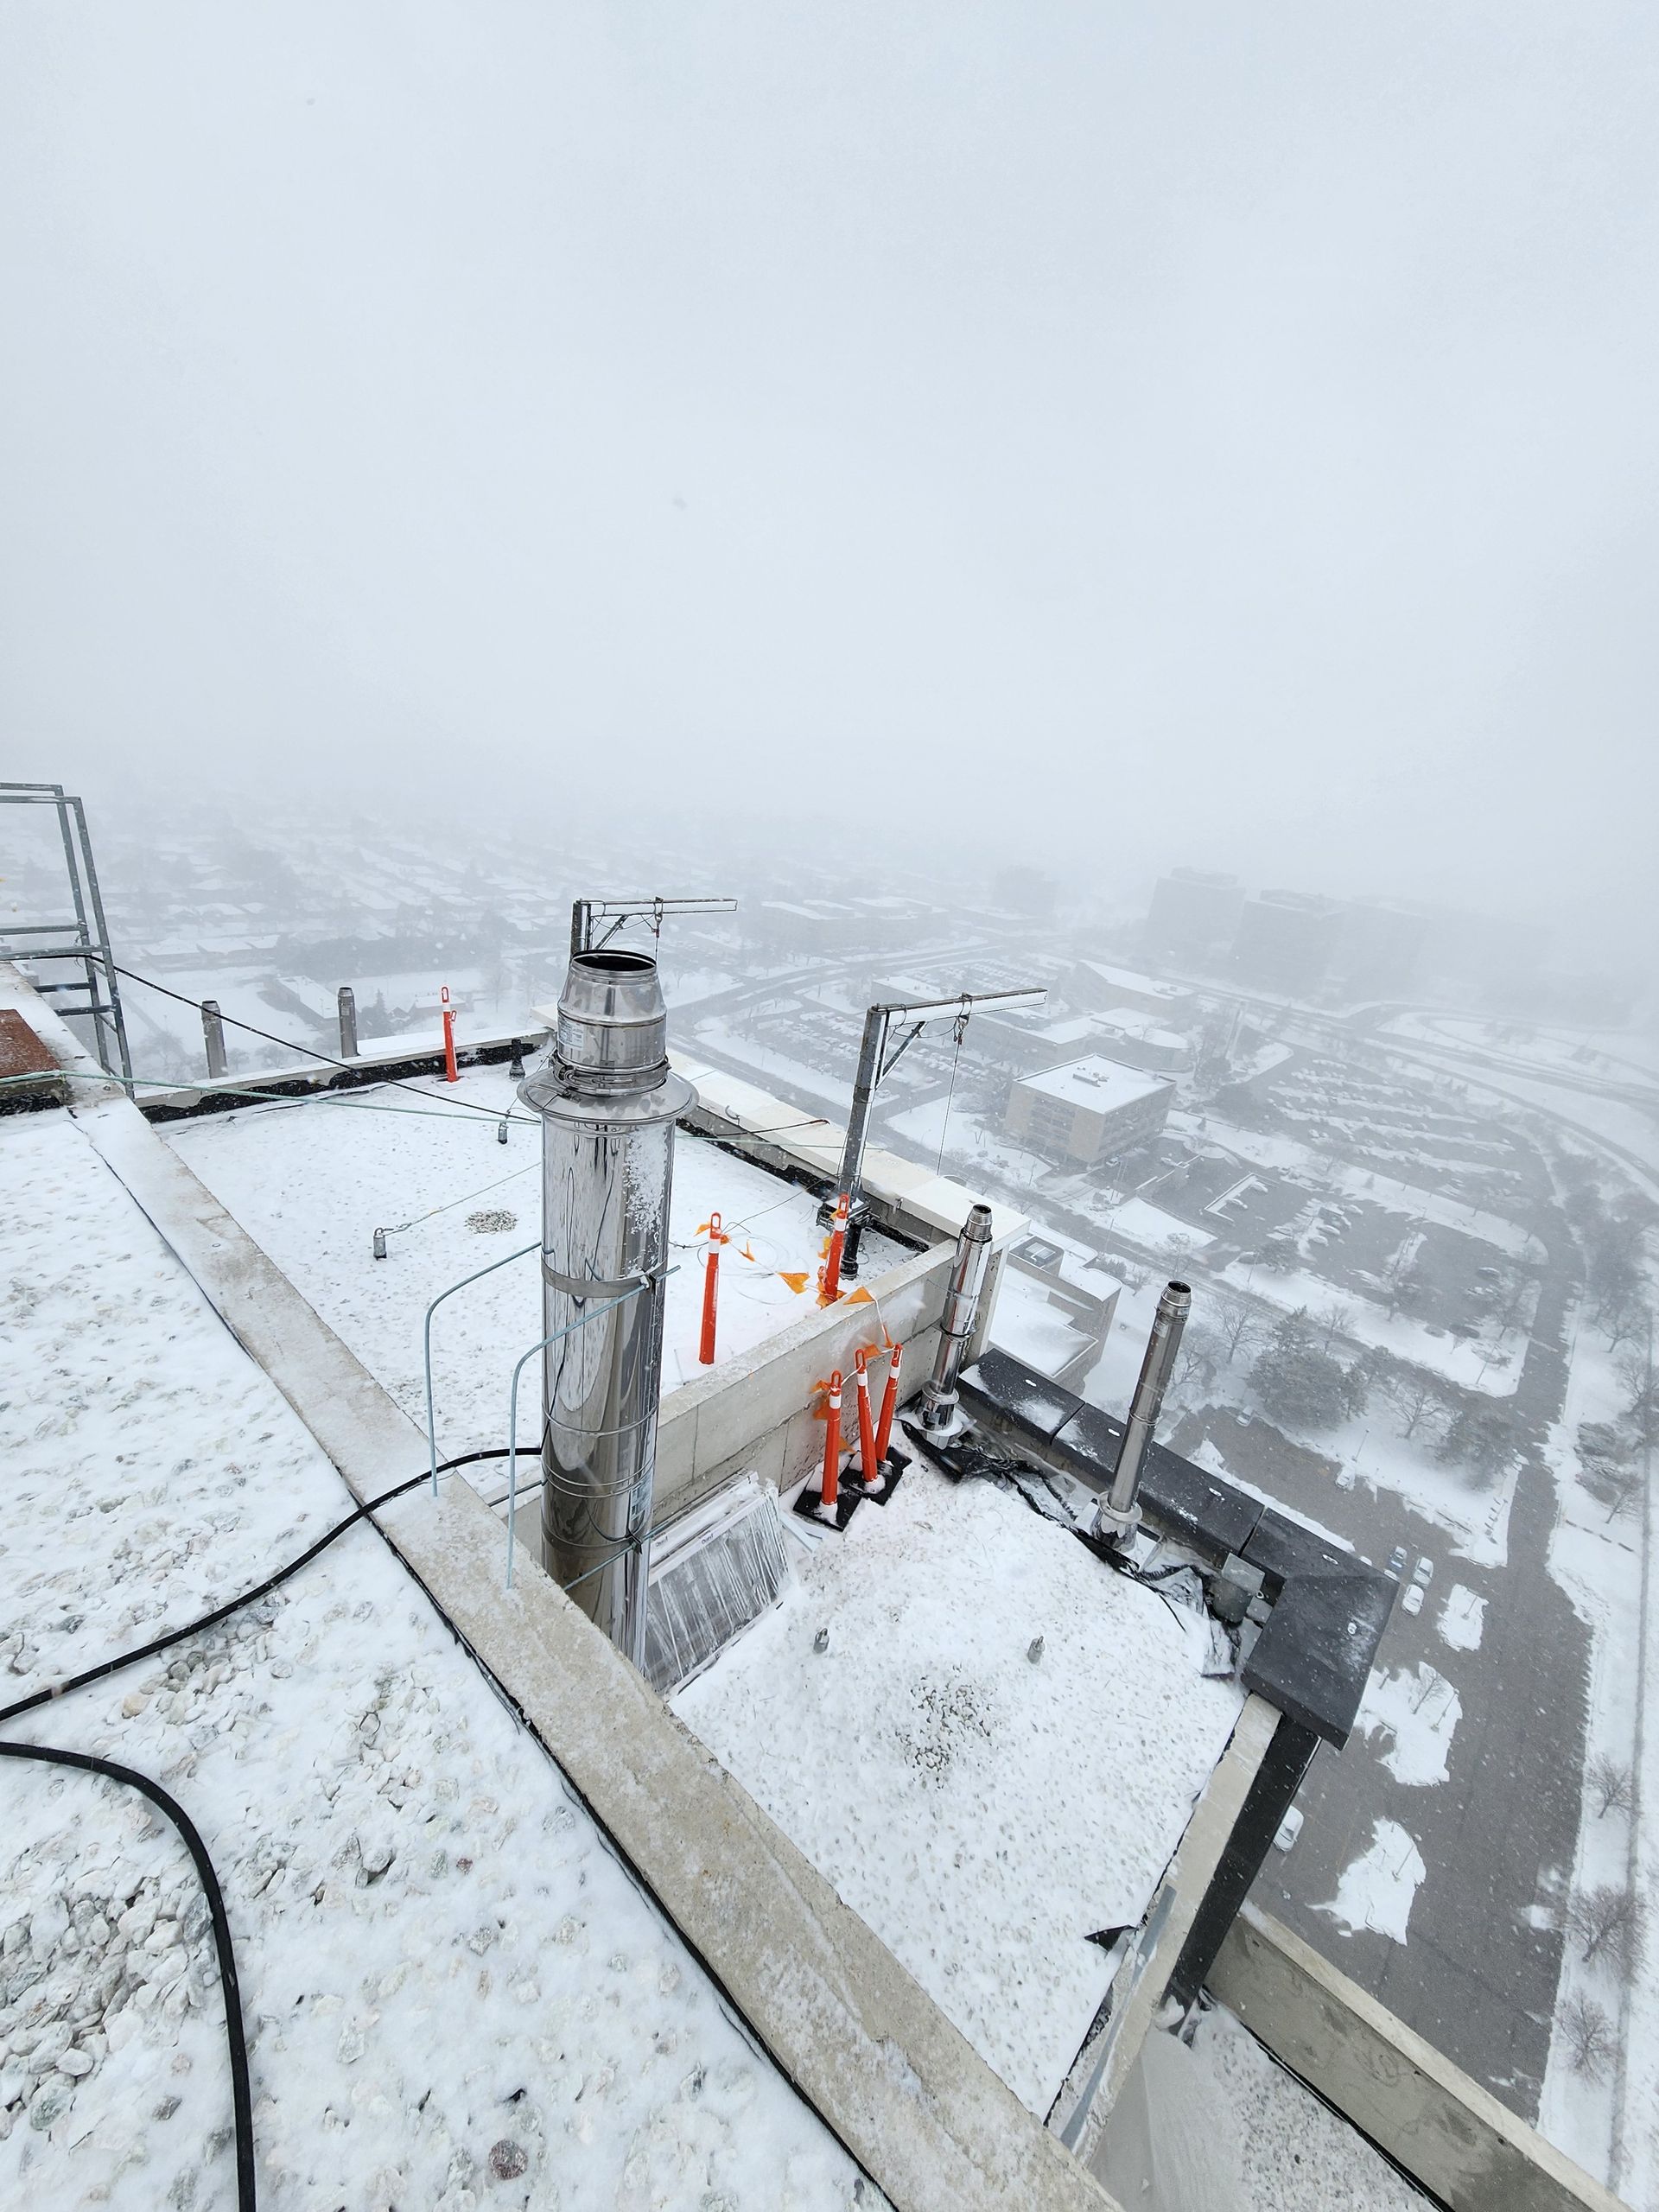 A snowy rooftop with a view of a city in the background.